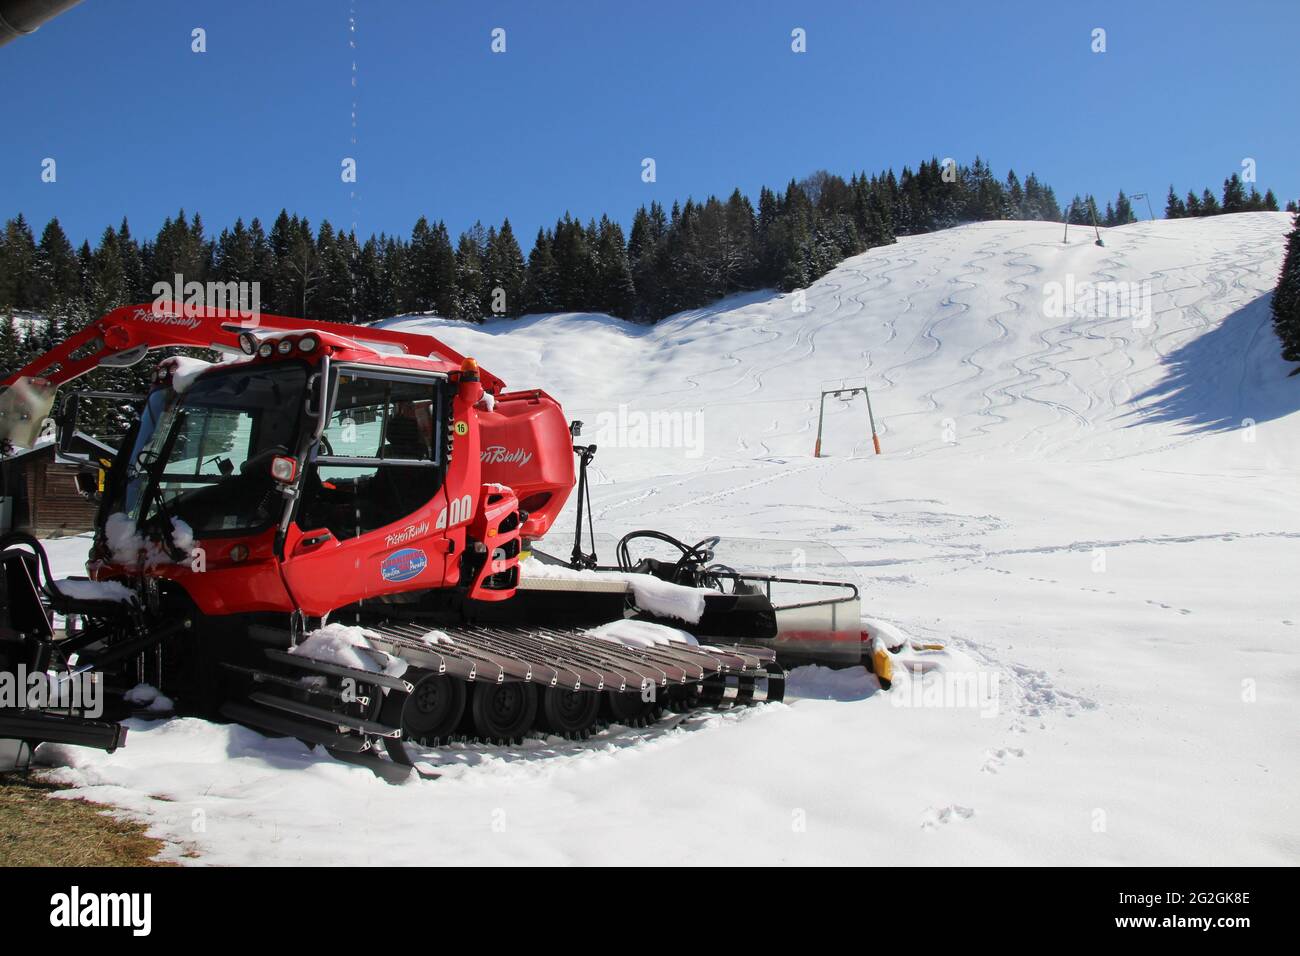 Pistenbully in the snow, hike in the skiing area of Mittenwald am Wildensee, Hoher Kranzberg, tracks in the snow, Europe, Germany, Bavaria, Upper Bavaria, Mittenwald, Werdenfelser Land, Isar Valley Stock Photo